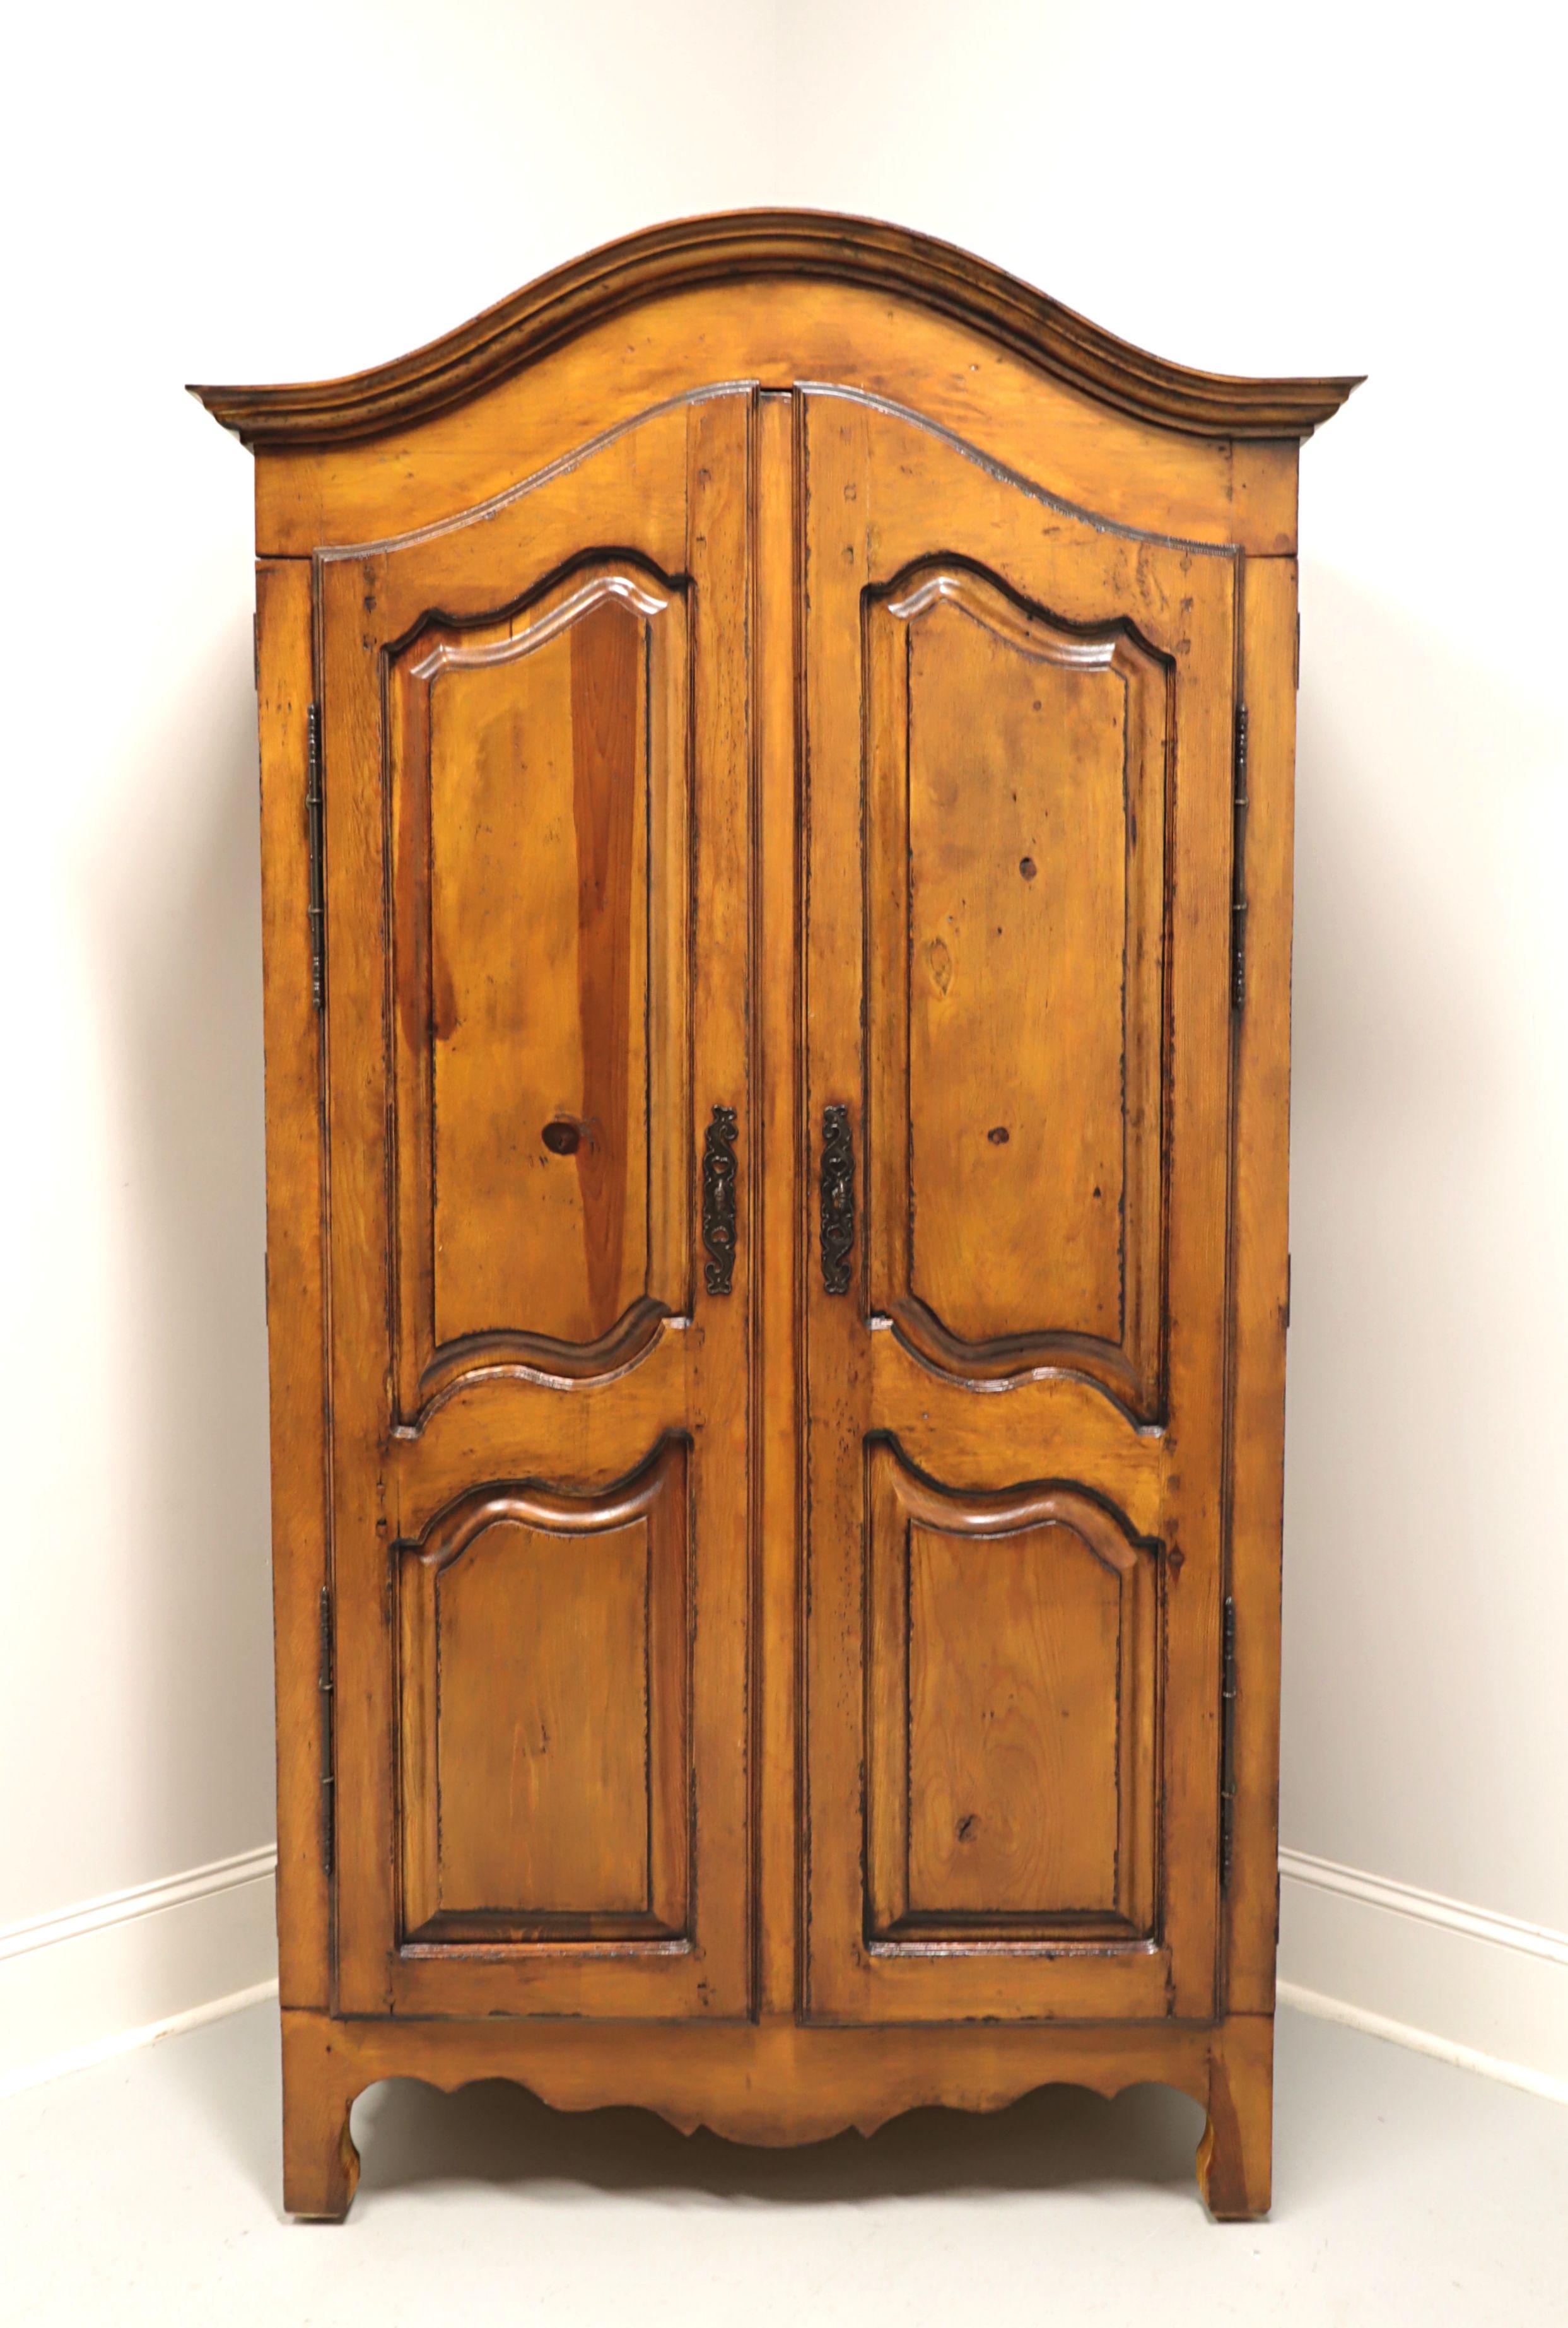 A French Country style armoire / linen press, unbranded, similar quality to Drexel or Ethan Allen. Solid pine with brass hardware. Features arched top with crown molding, double raised panel fold flat doors with carved detail, carved apron and